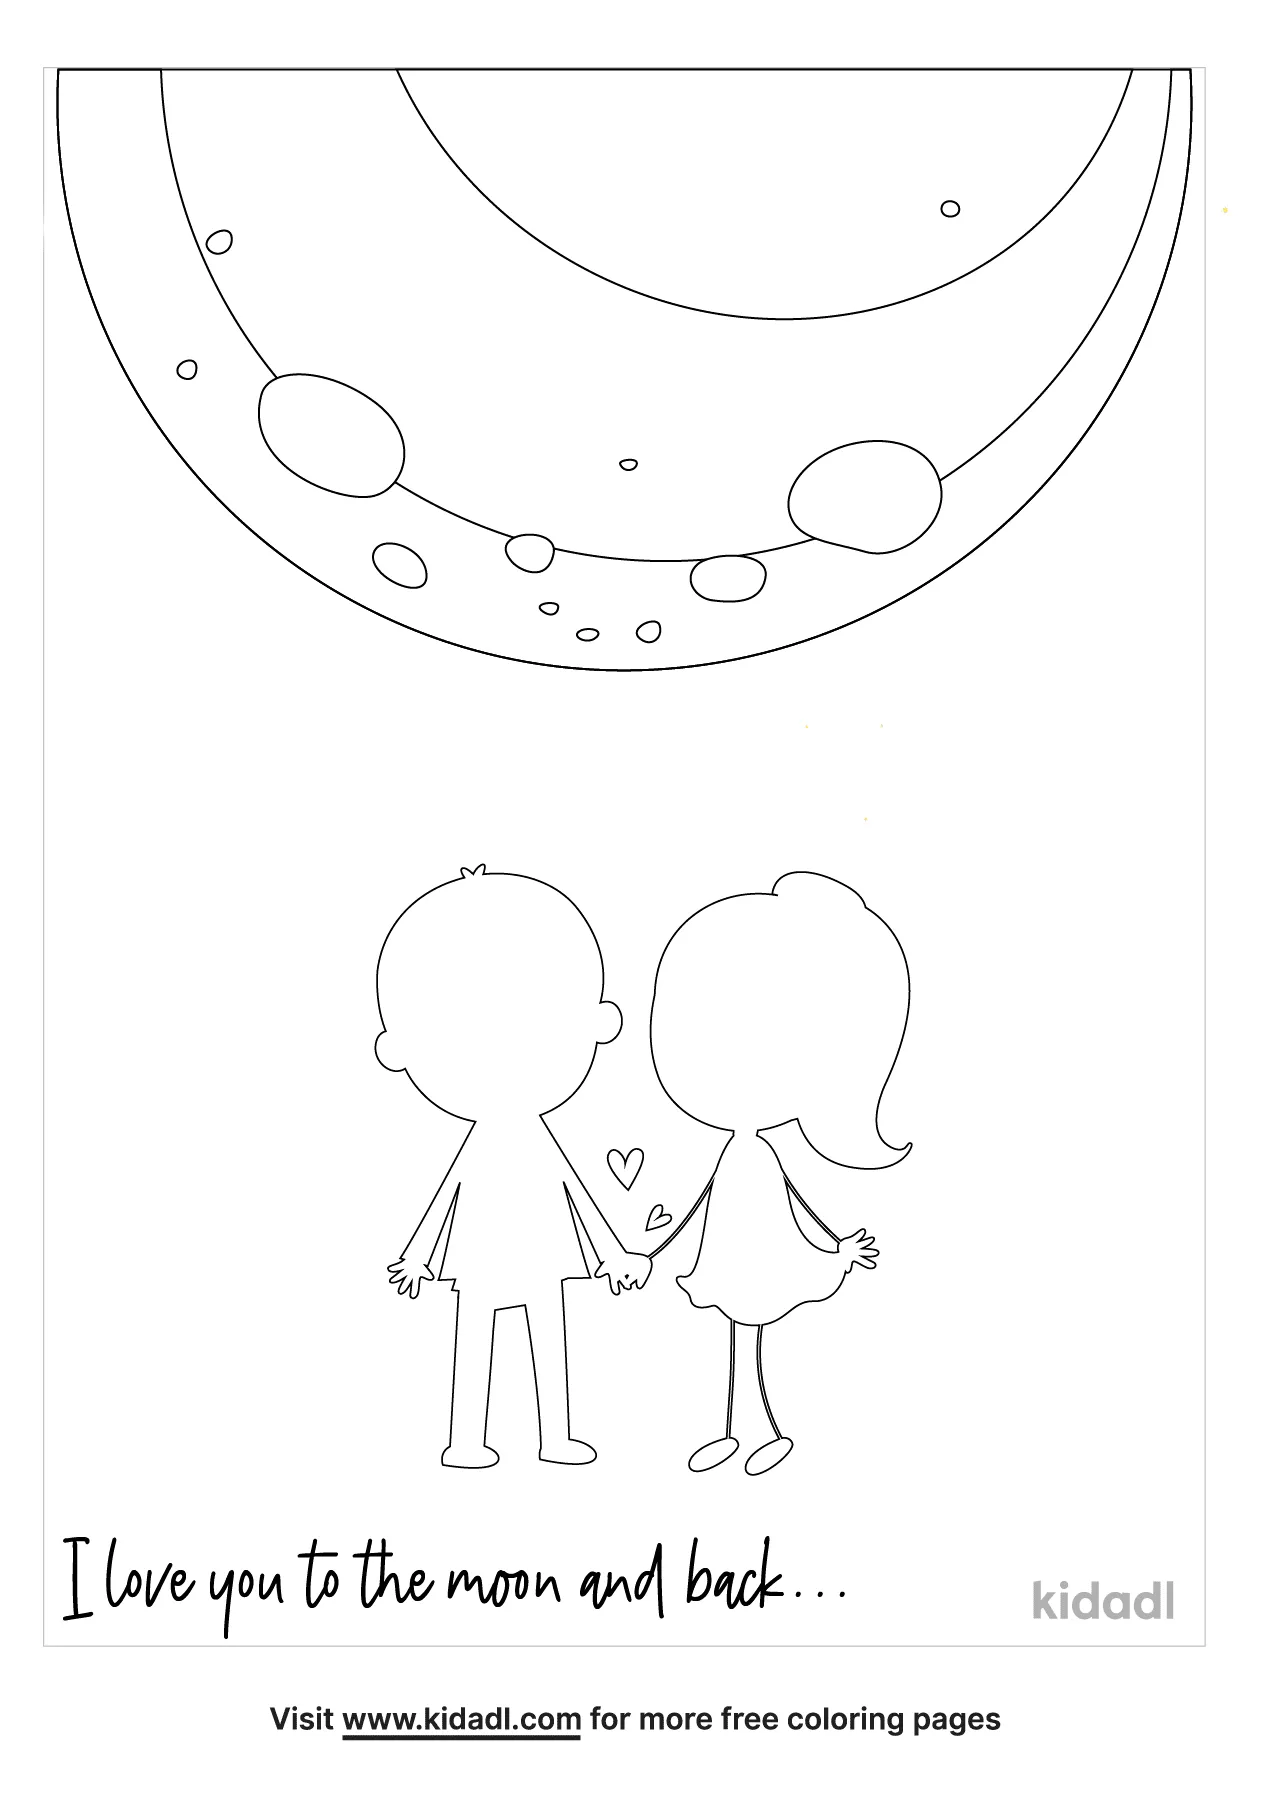 I Love You To The Moon And Back Coloring Pages Free Words Quotes Coloring Pages Kidadl